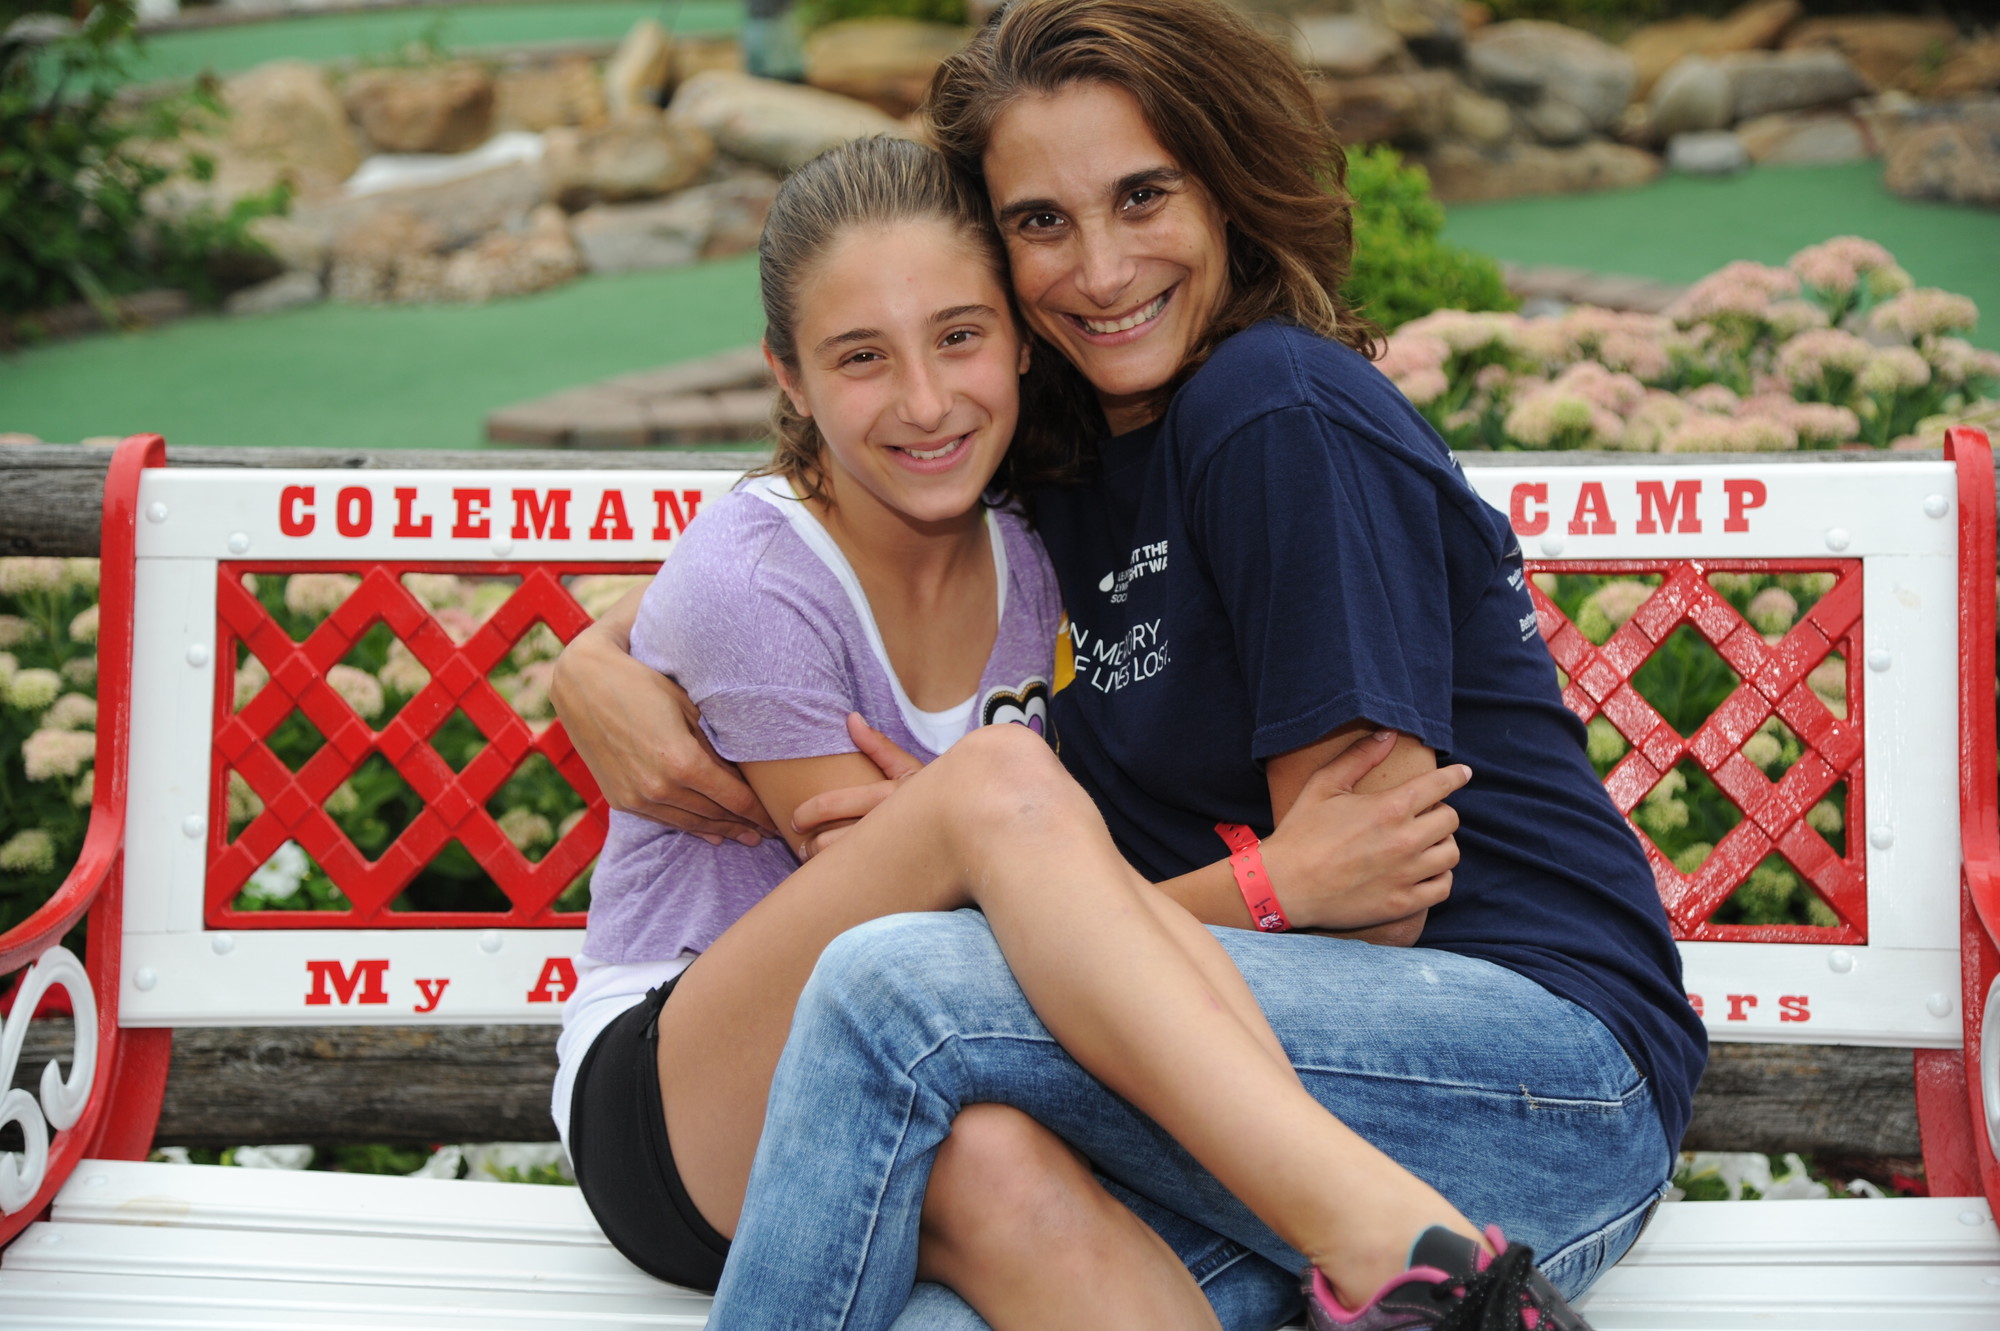 Kayla Nietsch, 12, with her mother, Julie, is fundraising in memory of her late grandparents.